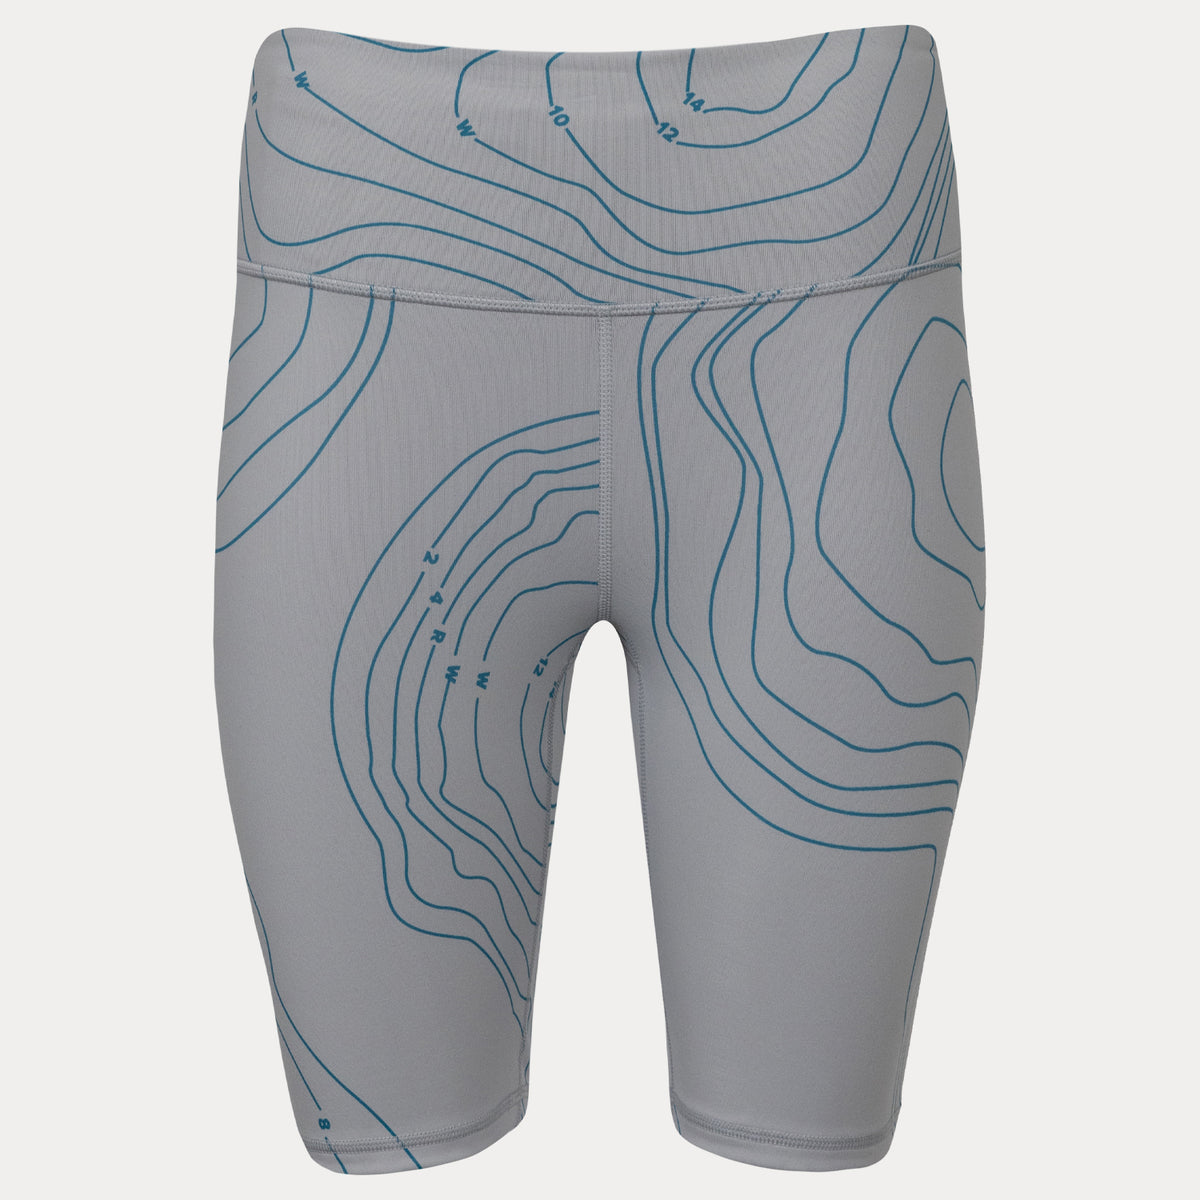 heather grey powerhold short with blue bathymetic line pattern